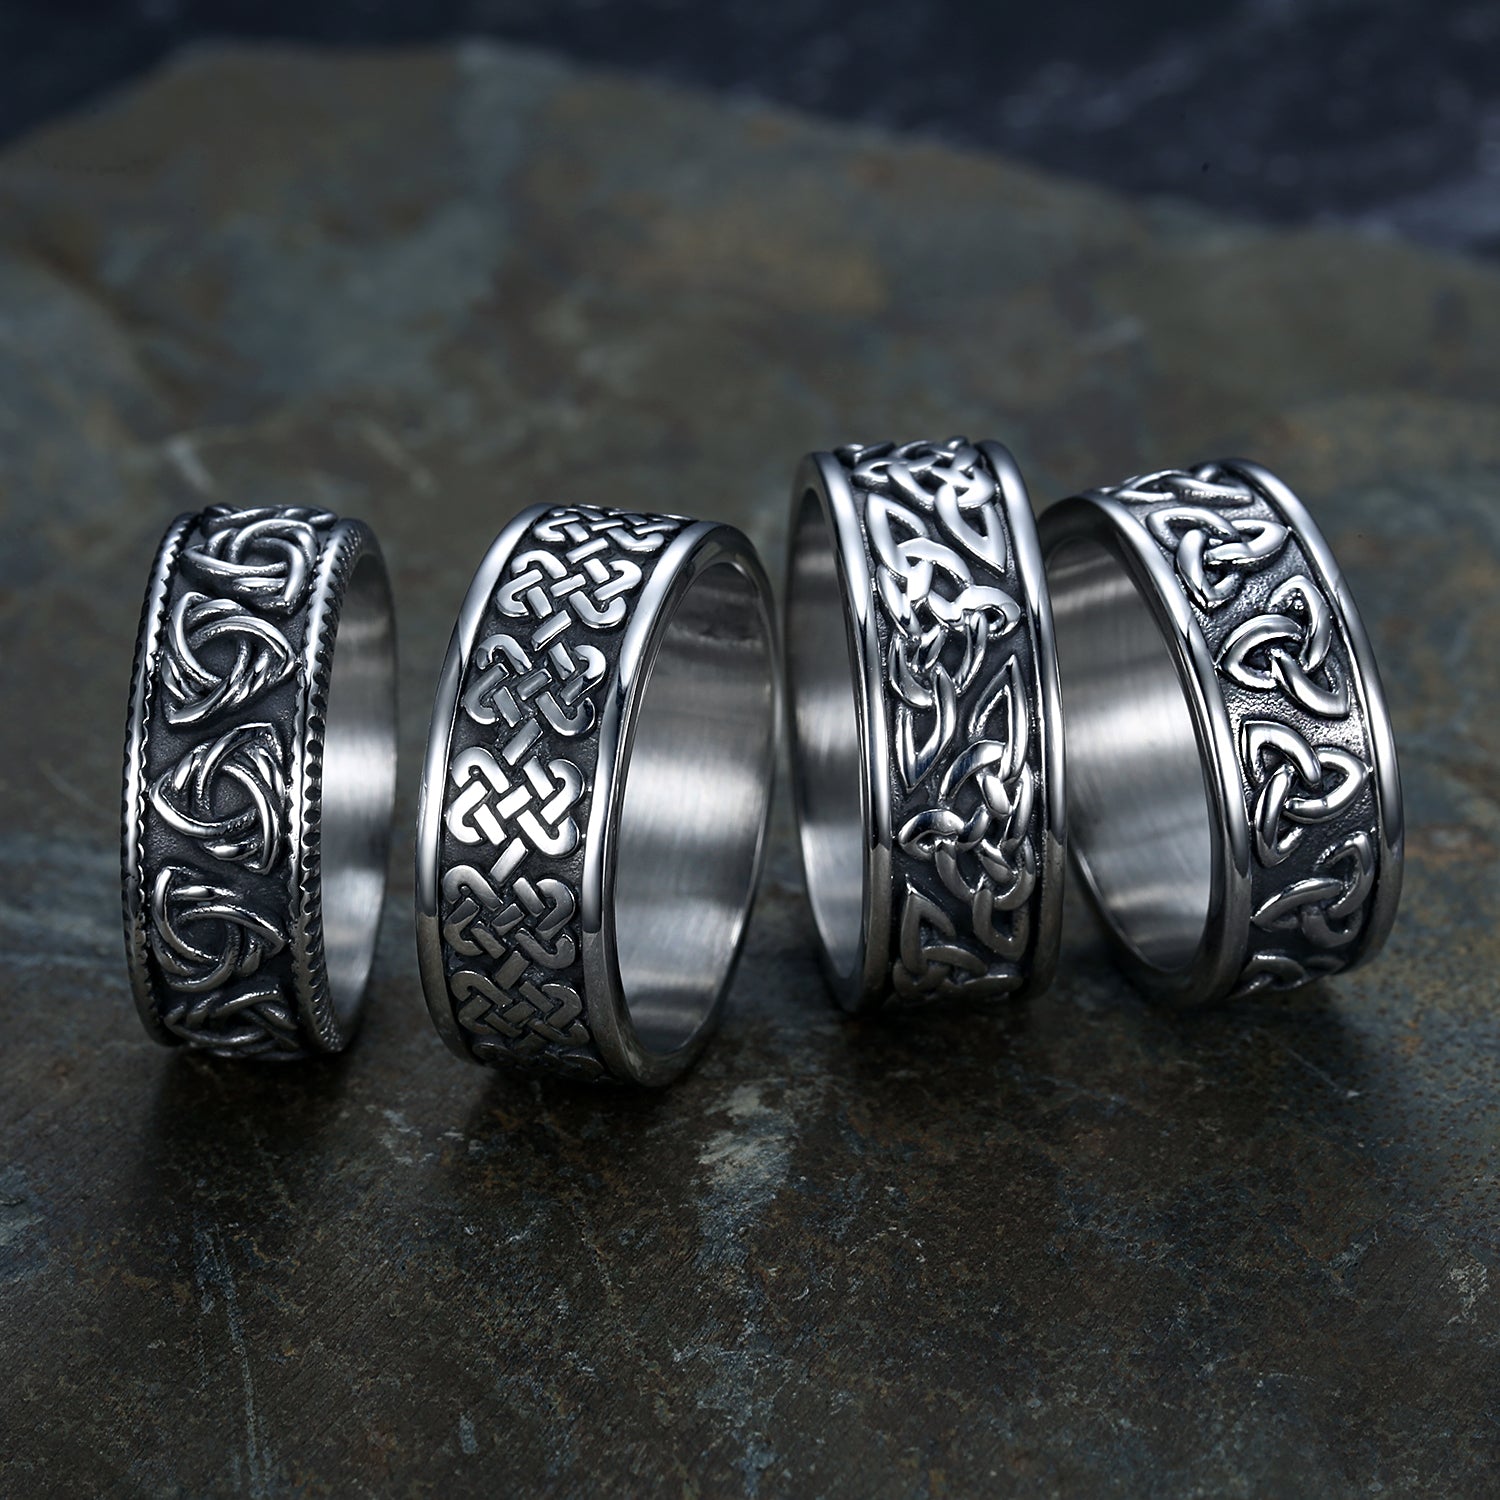 Stainless steel rings with Celtic knots.